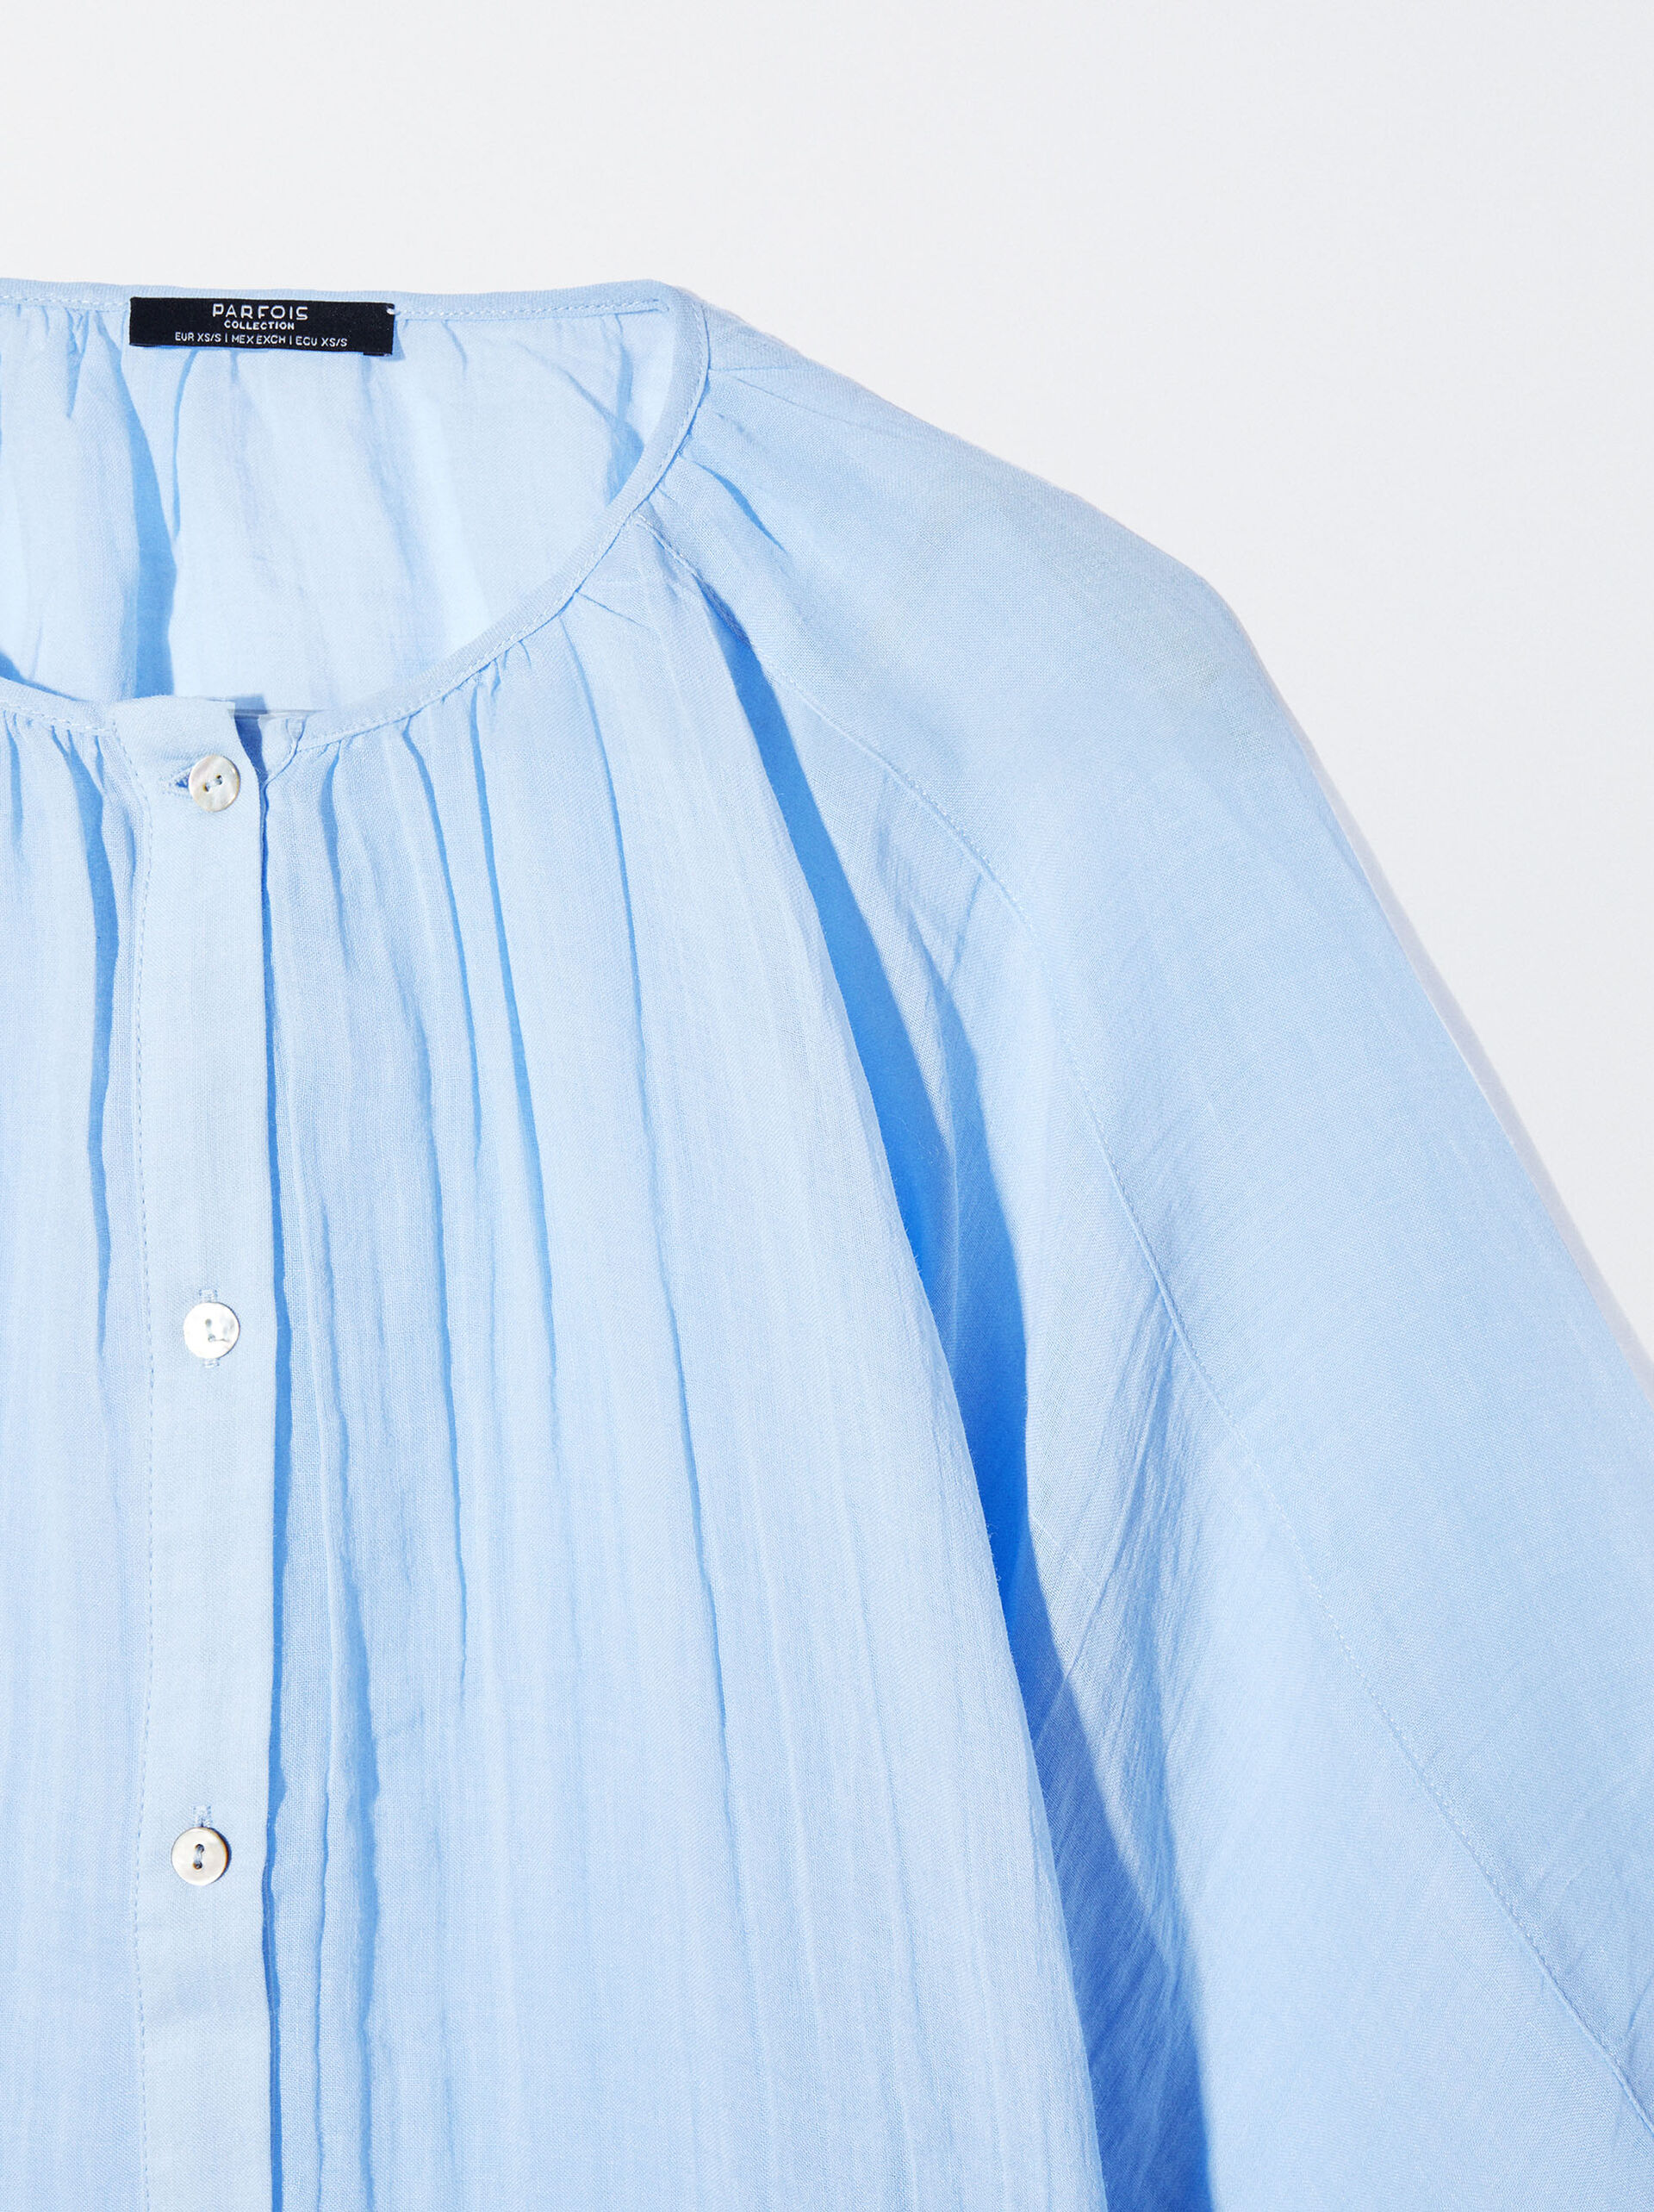 Puff Sleeve Shirt image number 5.0